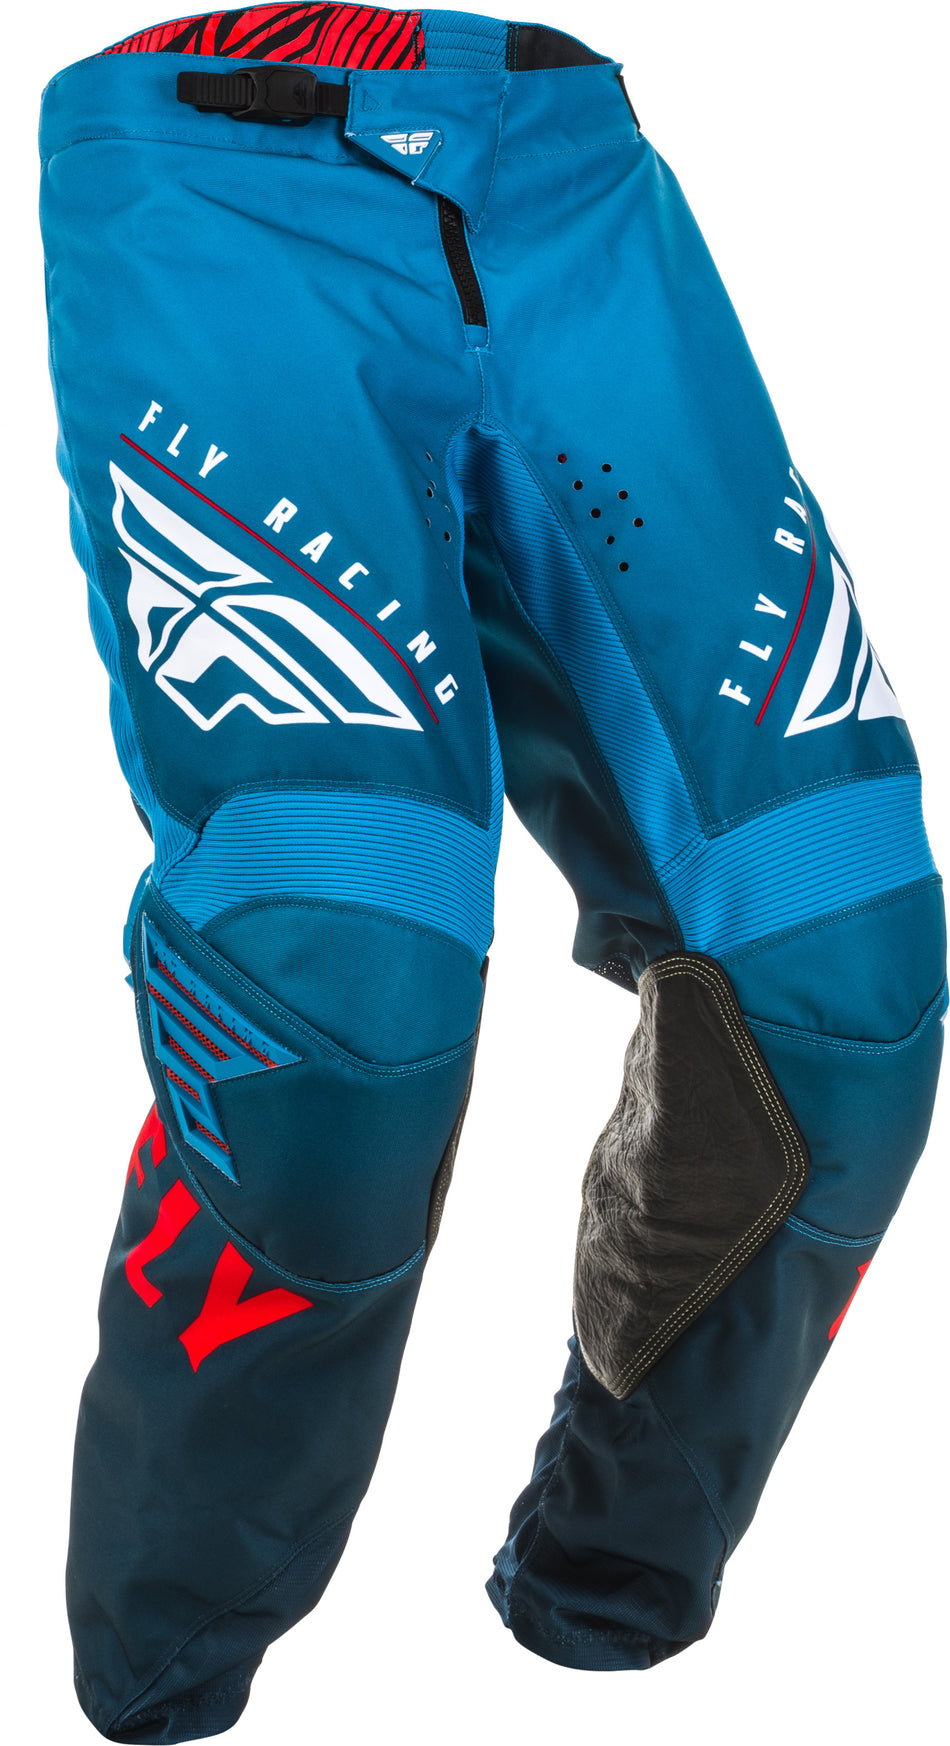 FLY RACING Kinetic K220 Pants Blue/White/Red Sz 36 373-53136